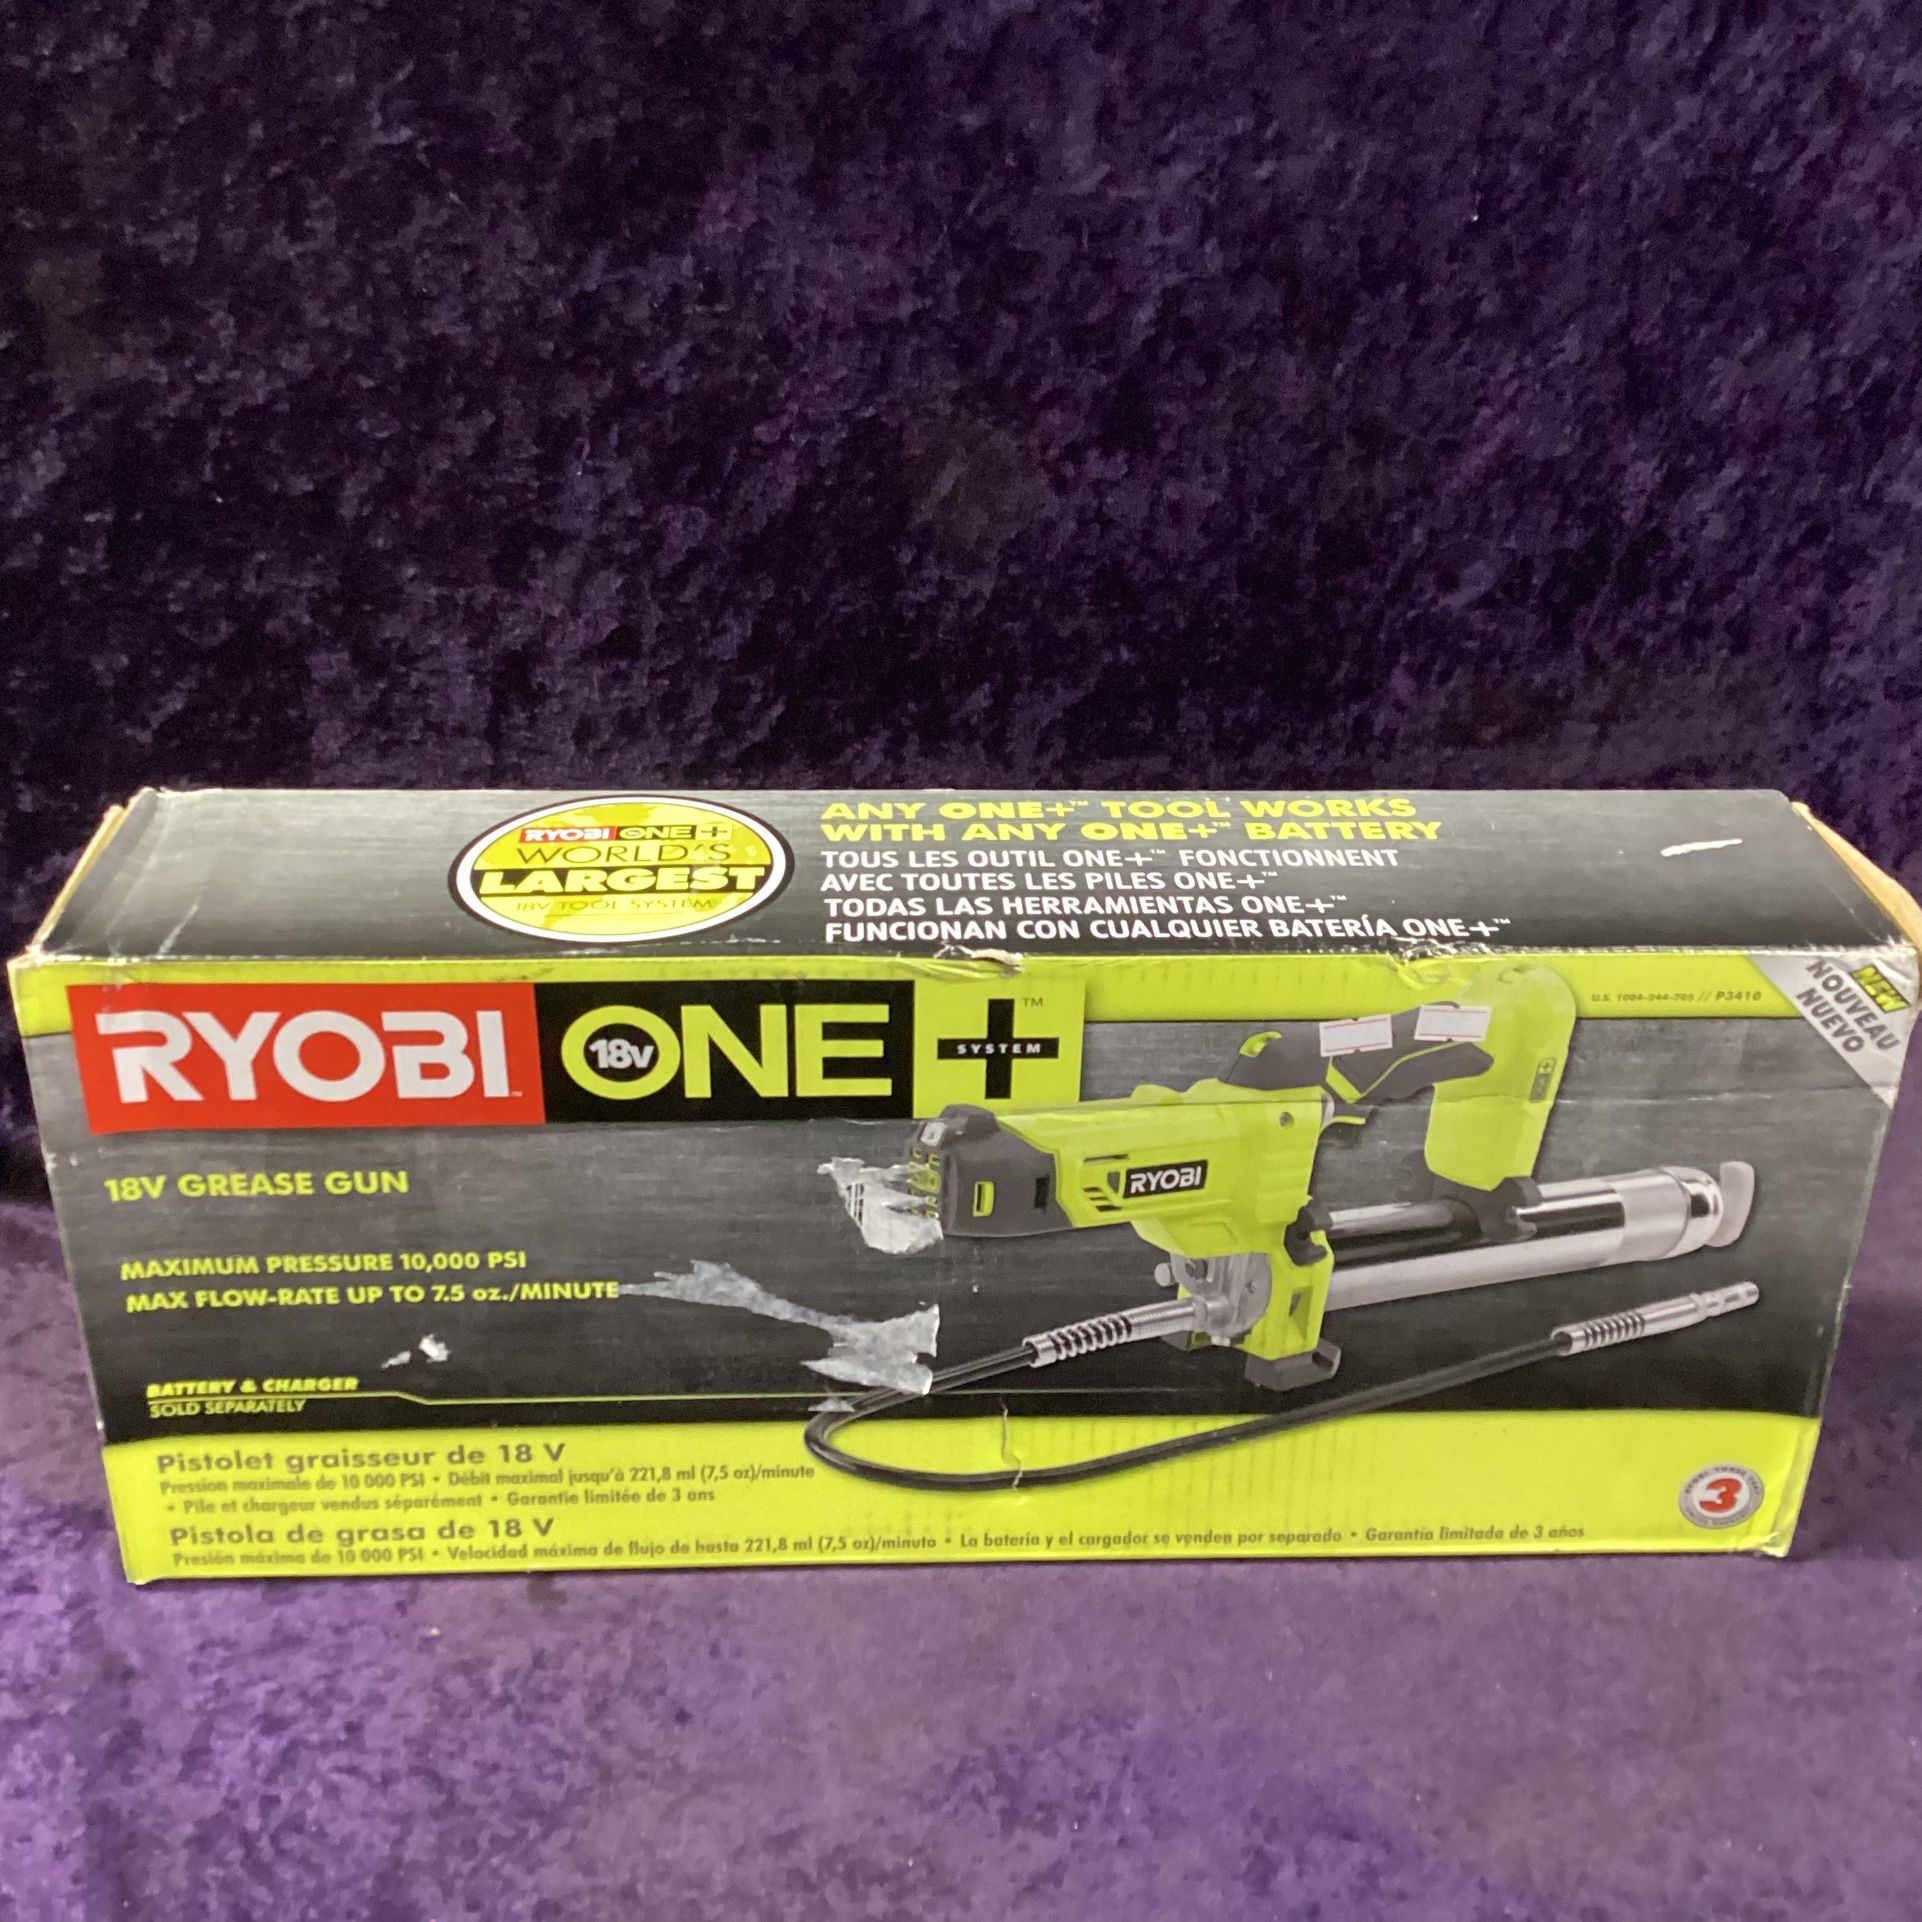 🧰RYOBI ONE+ 18V Cordless Grease Gun NEW IN BOX! (Tool-Only)-$120!🧰🛠